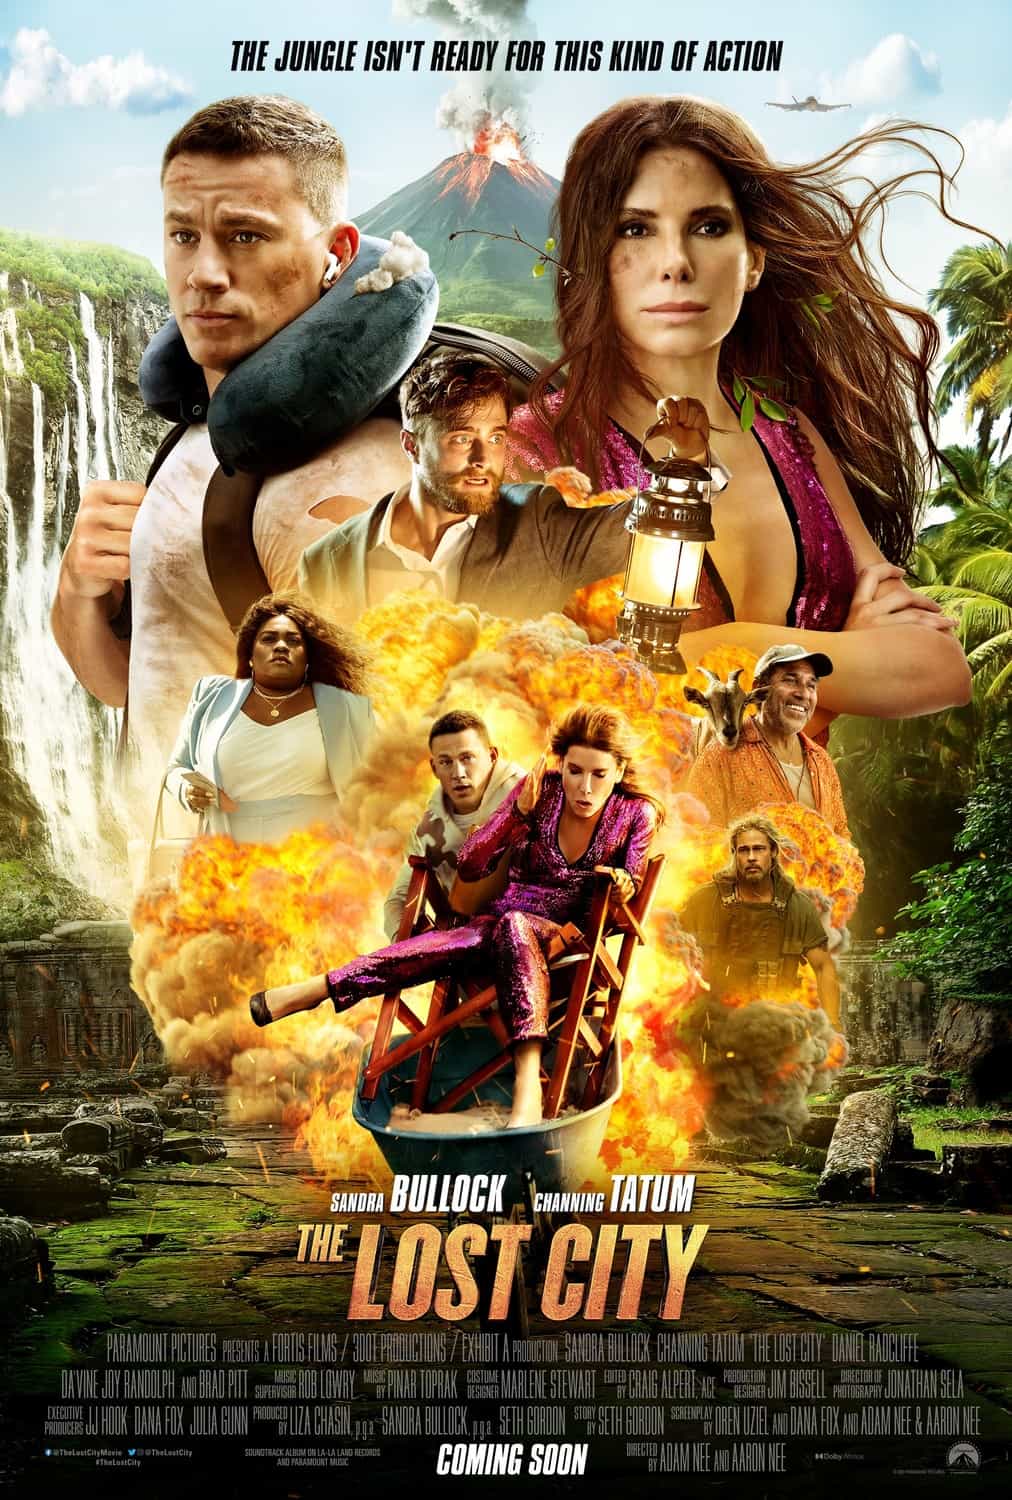 US Box Office Weekend Report 25th - 27th March 2022: Sandra Bullock and Canning Tatum take over the top of the box office with The Lost City making its debut